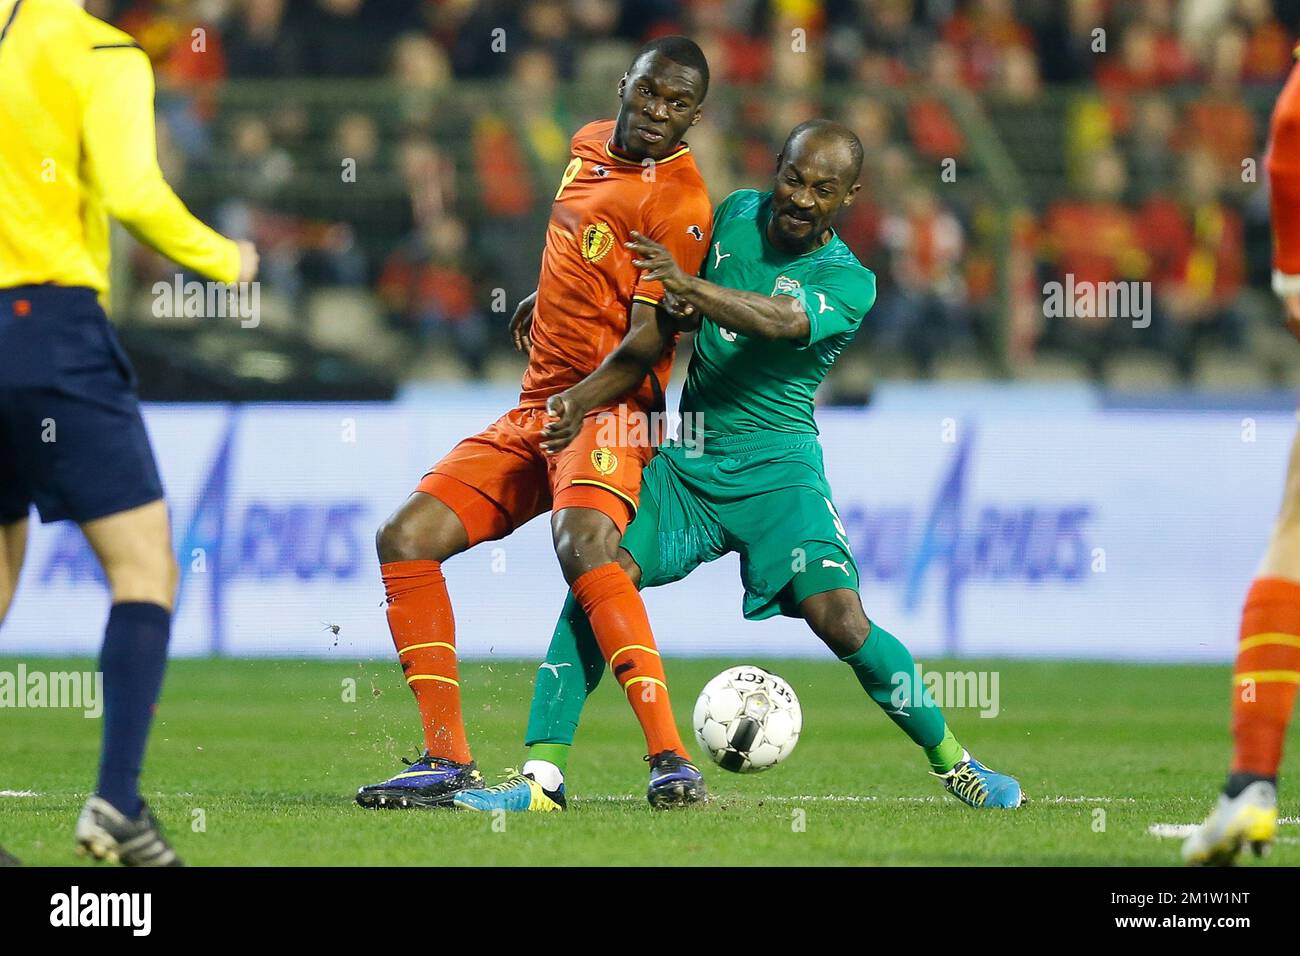 Belgium's Christian Benteke and Ivory Coast's Didier Zokora fight for the ball during a friendly soccer game between the Belgian national team the Red Devils and Ivory Coast, Wednesday 05 March 2014 in Brussels.  Stock Photo